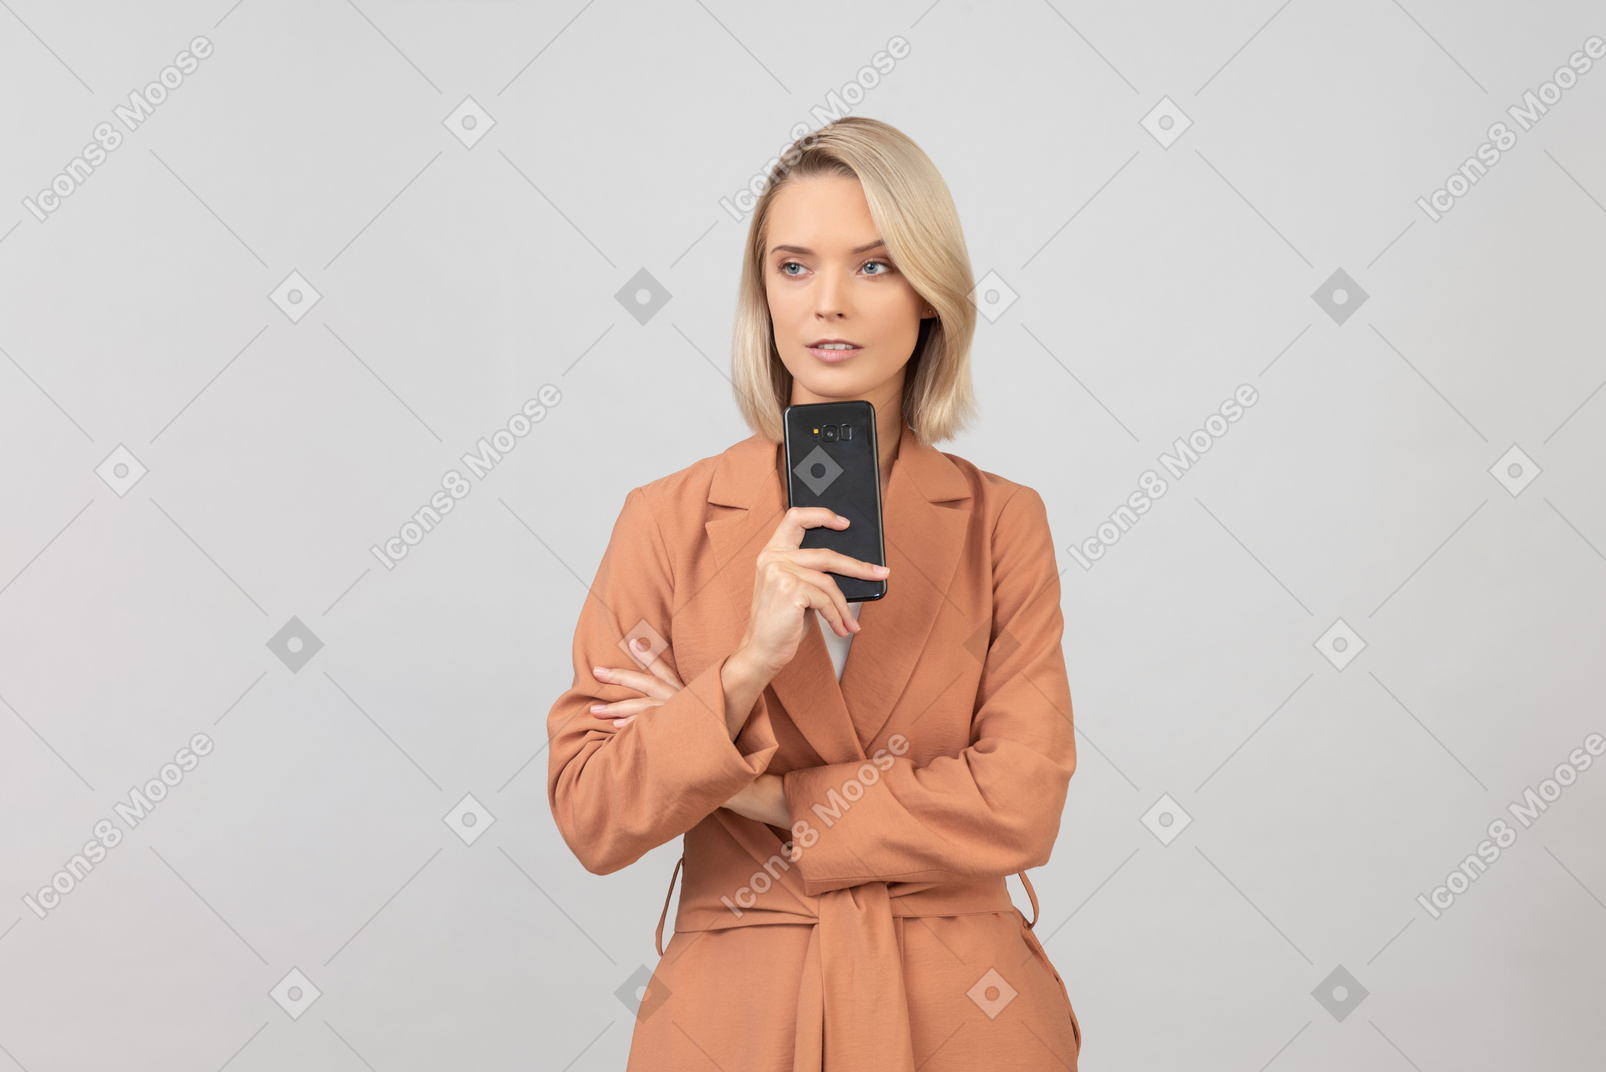 Contemplative young woman holding a smartphone